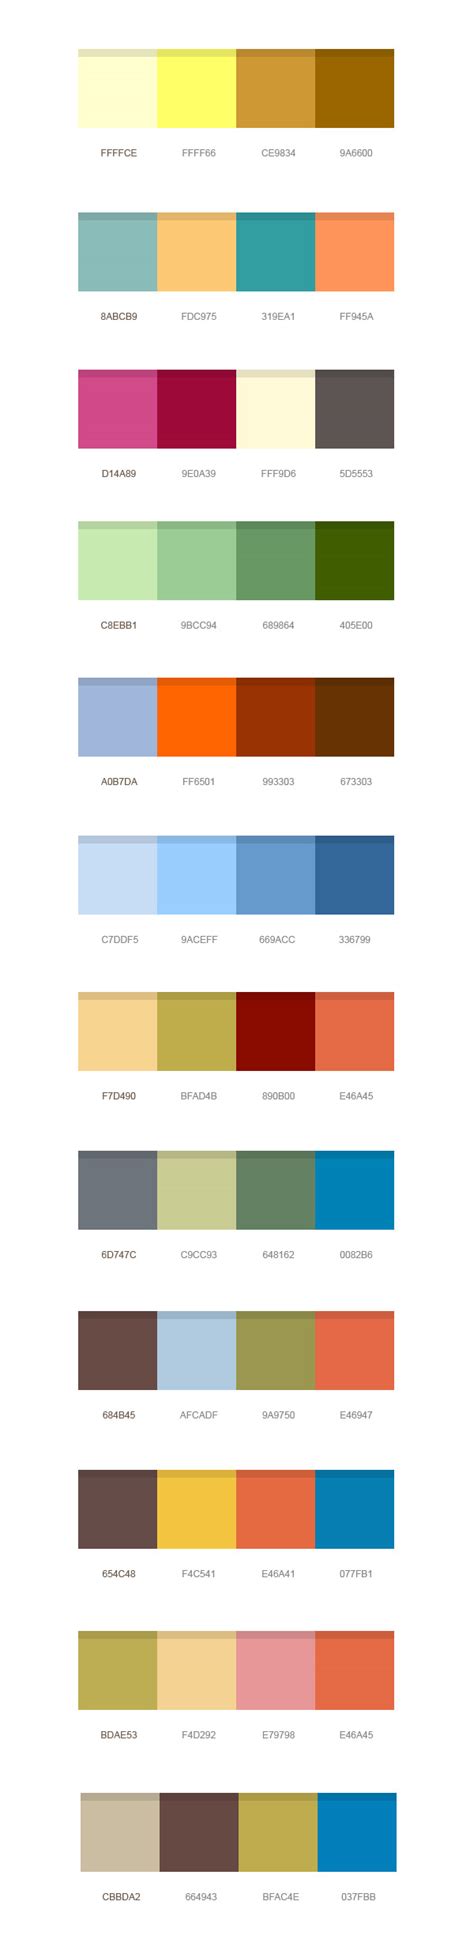 12 Set Of Color Combinations Psd Free Ucoz Scripts Templates Free